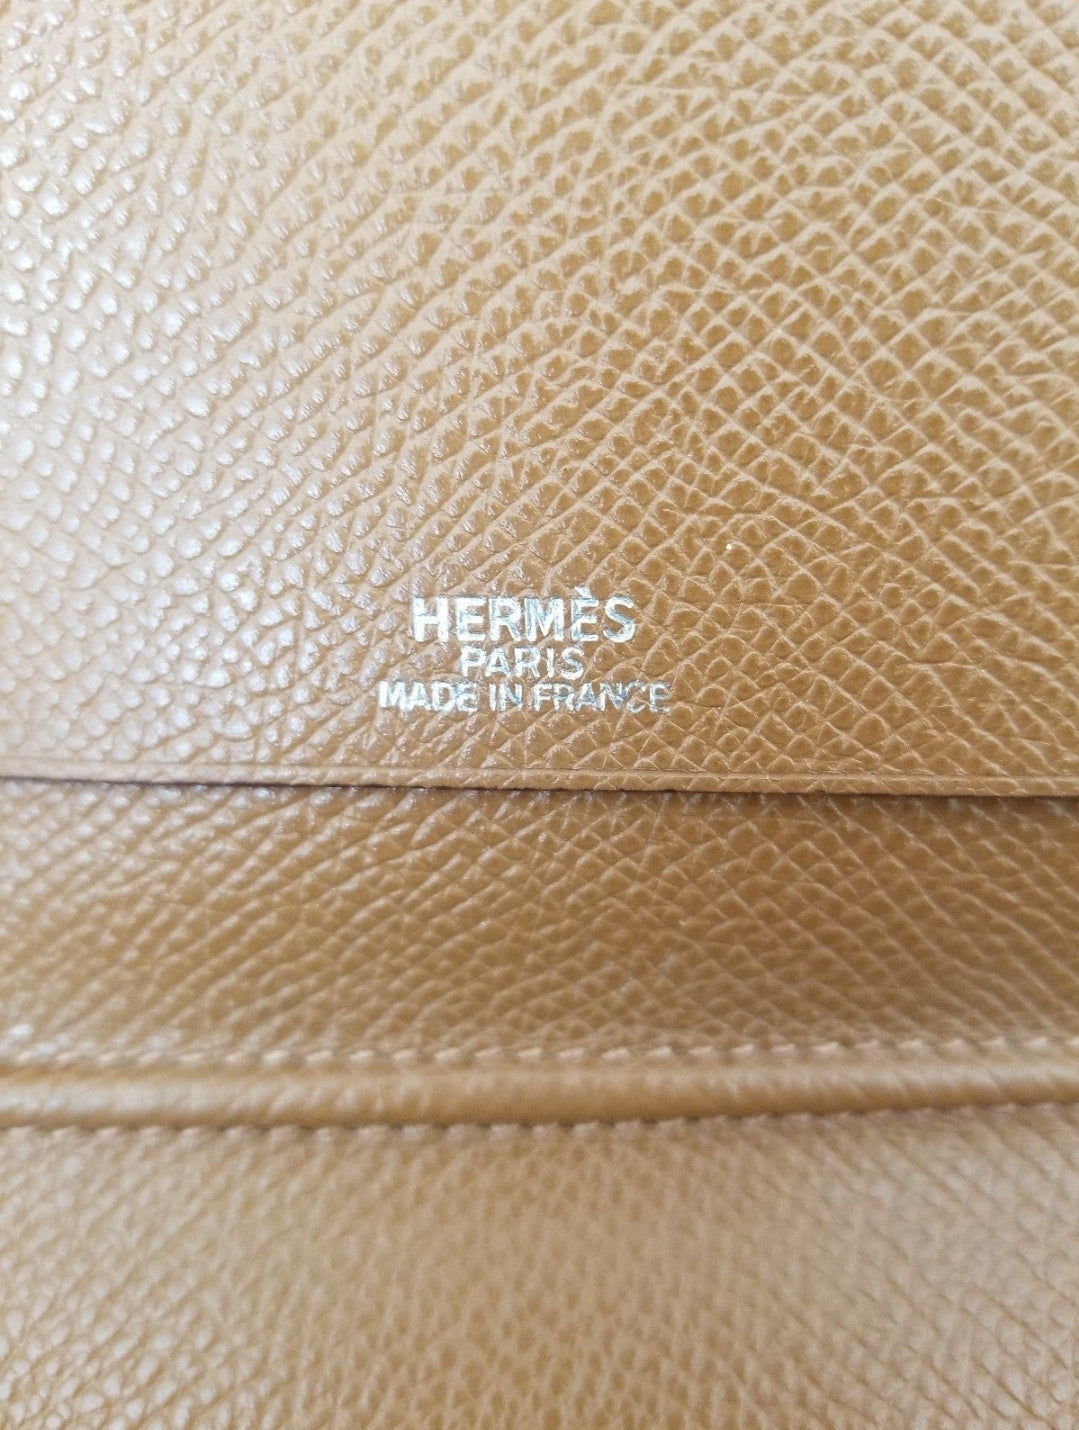 Hermès Taurillon Clemence Leather Notebook Agenda Cover